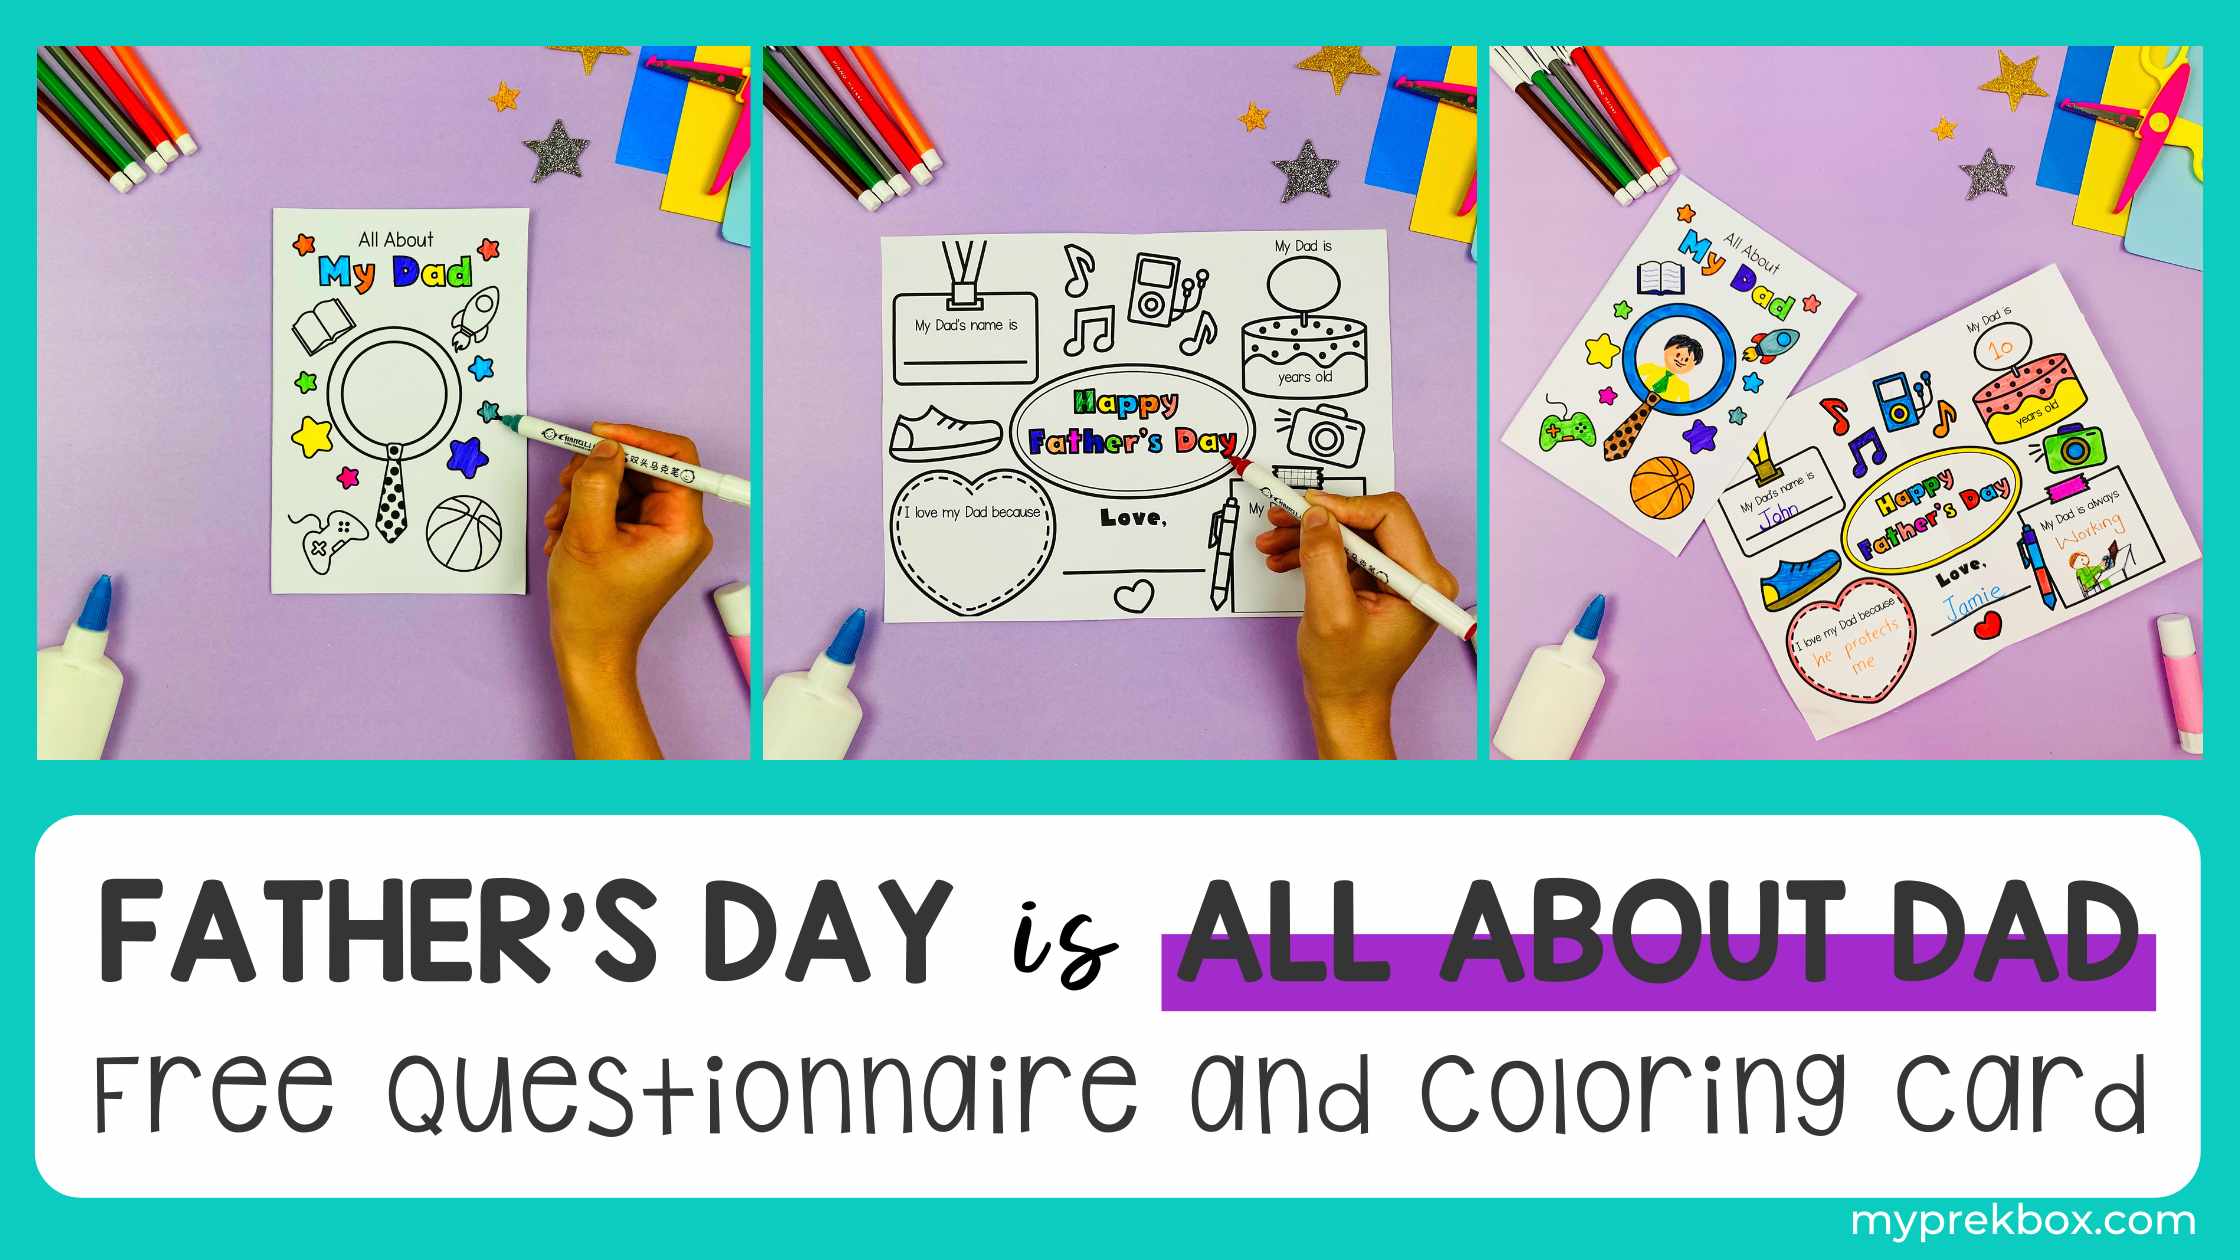 All About Dad Questionnaire Coloring Card: A Perfect Father’s Day Gift!